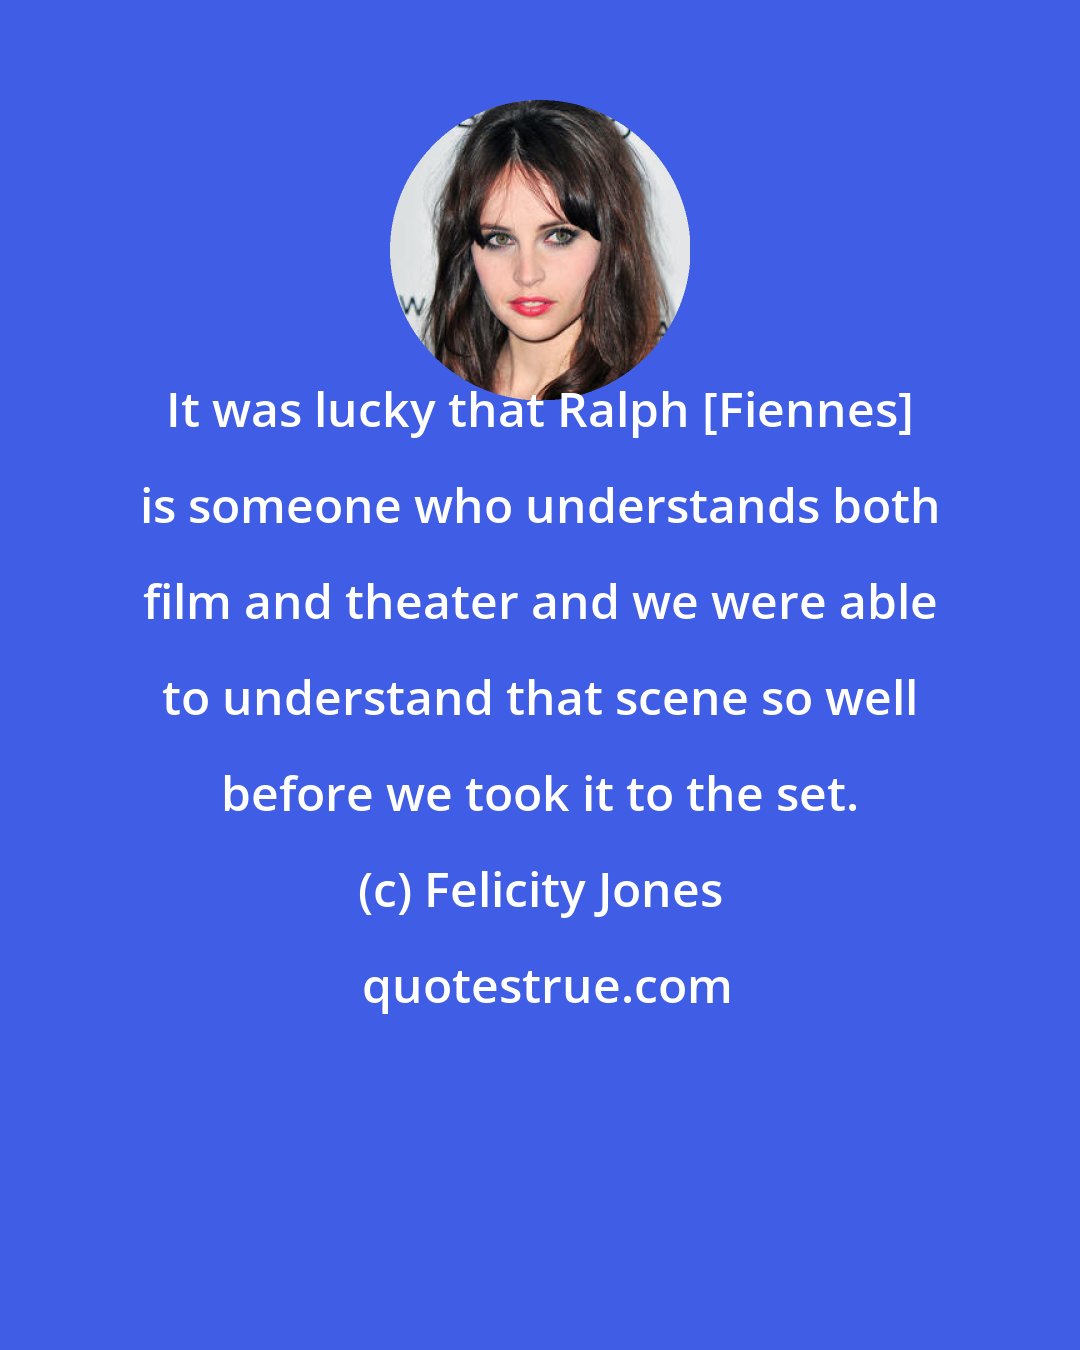 Felicity Jones: It was lucky that Ralph [Fiennes] is someone who understands both film and theater and we were able to understand that scene so well before we took it to the set.